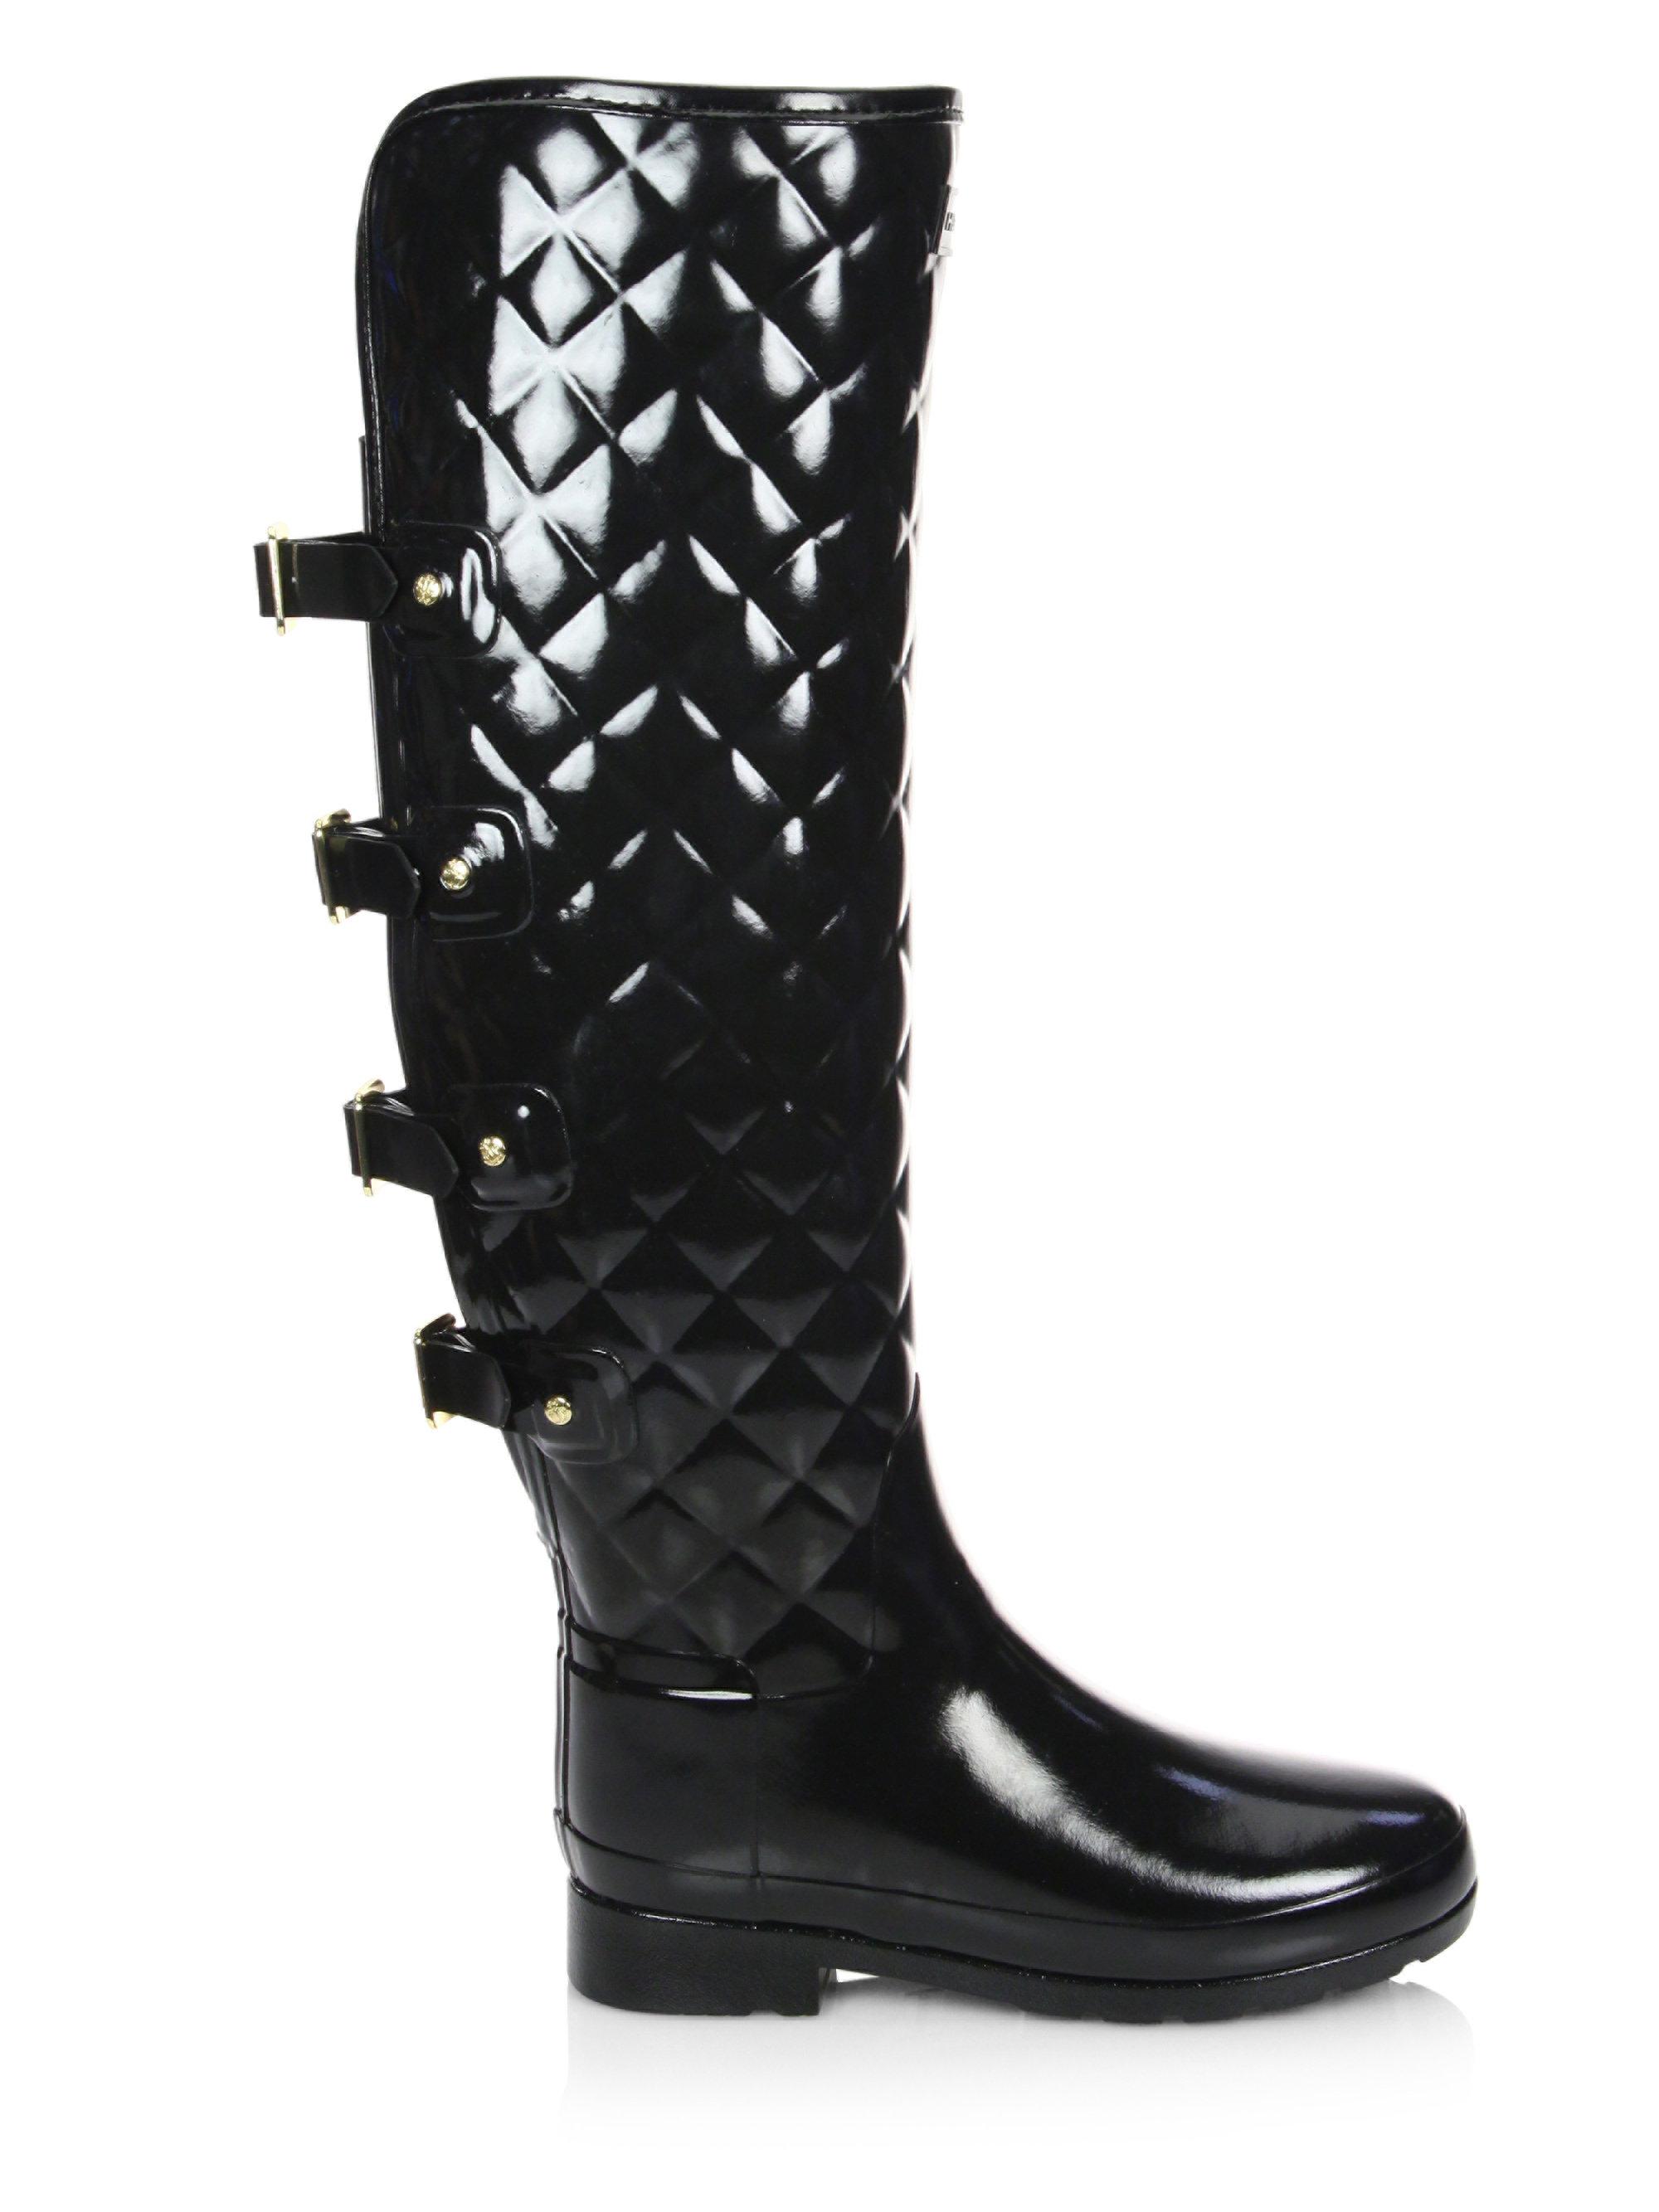 Lyst - HUNTER Refined Quilted Over-the-knee Rain Boots in Black